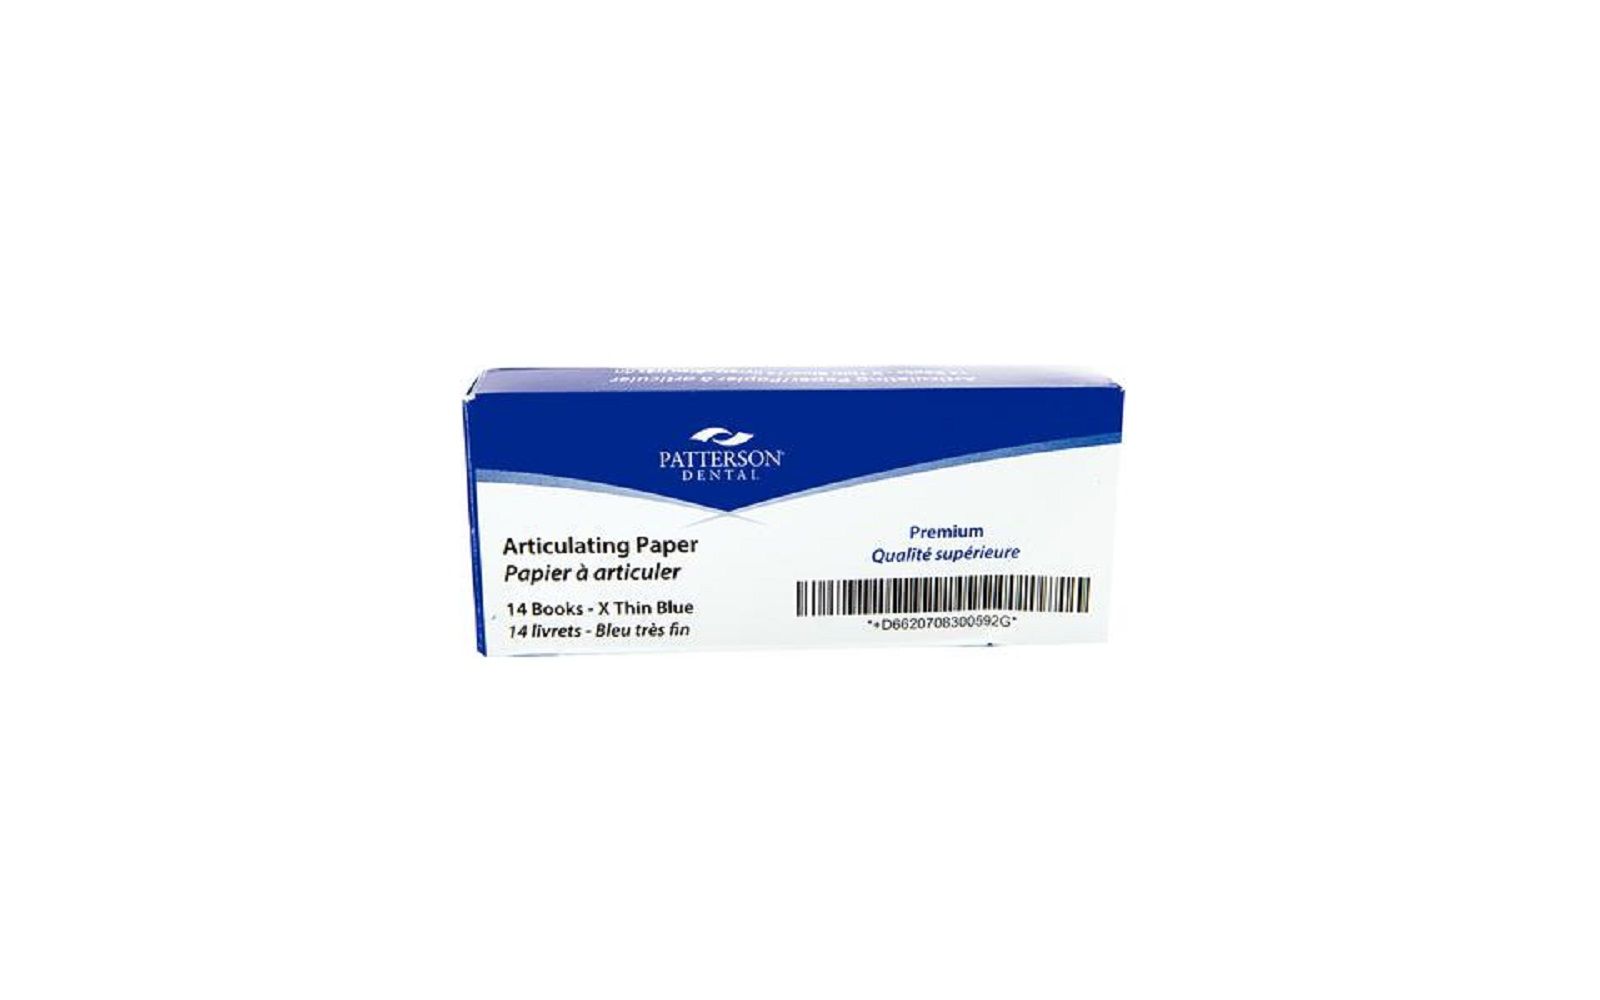 Patterson® premium articulating paper - patterson dental supply